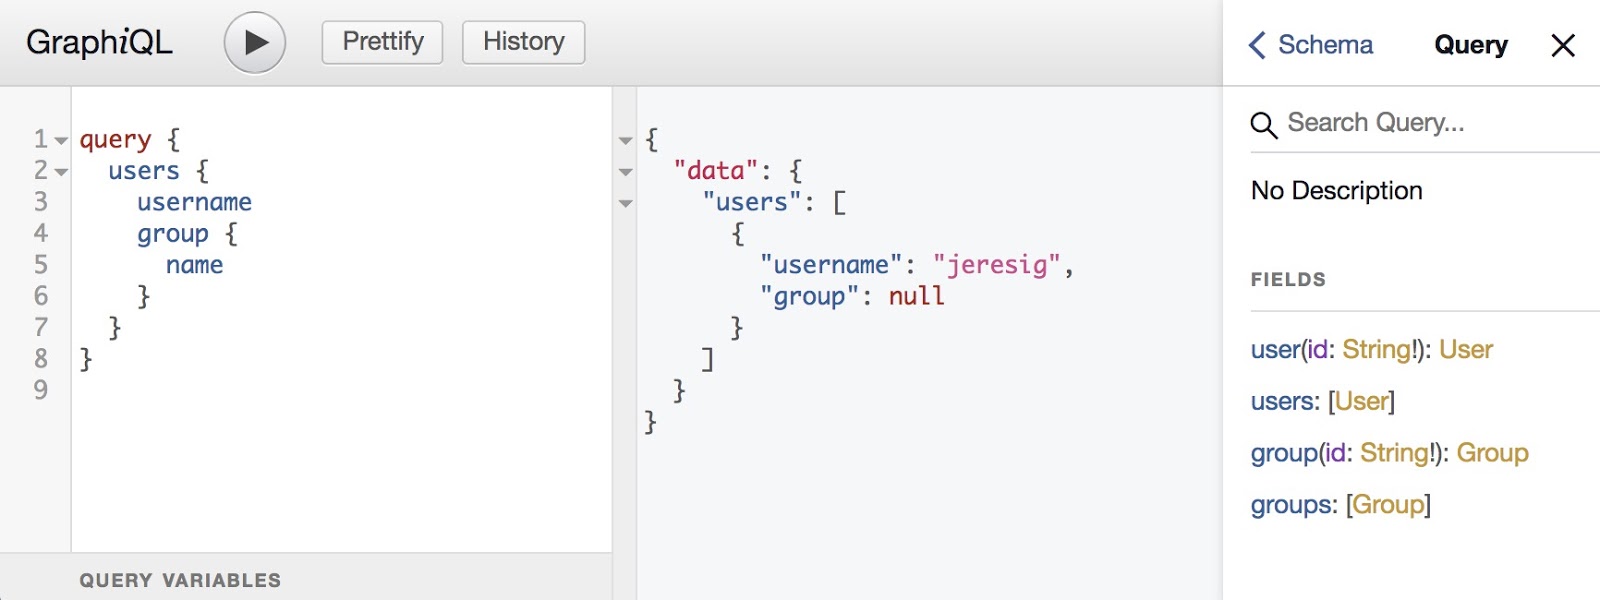 null group result in GraphiQL